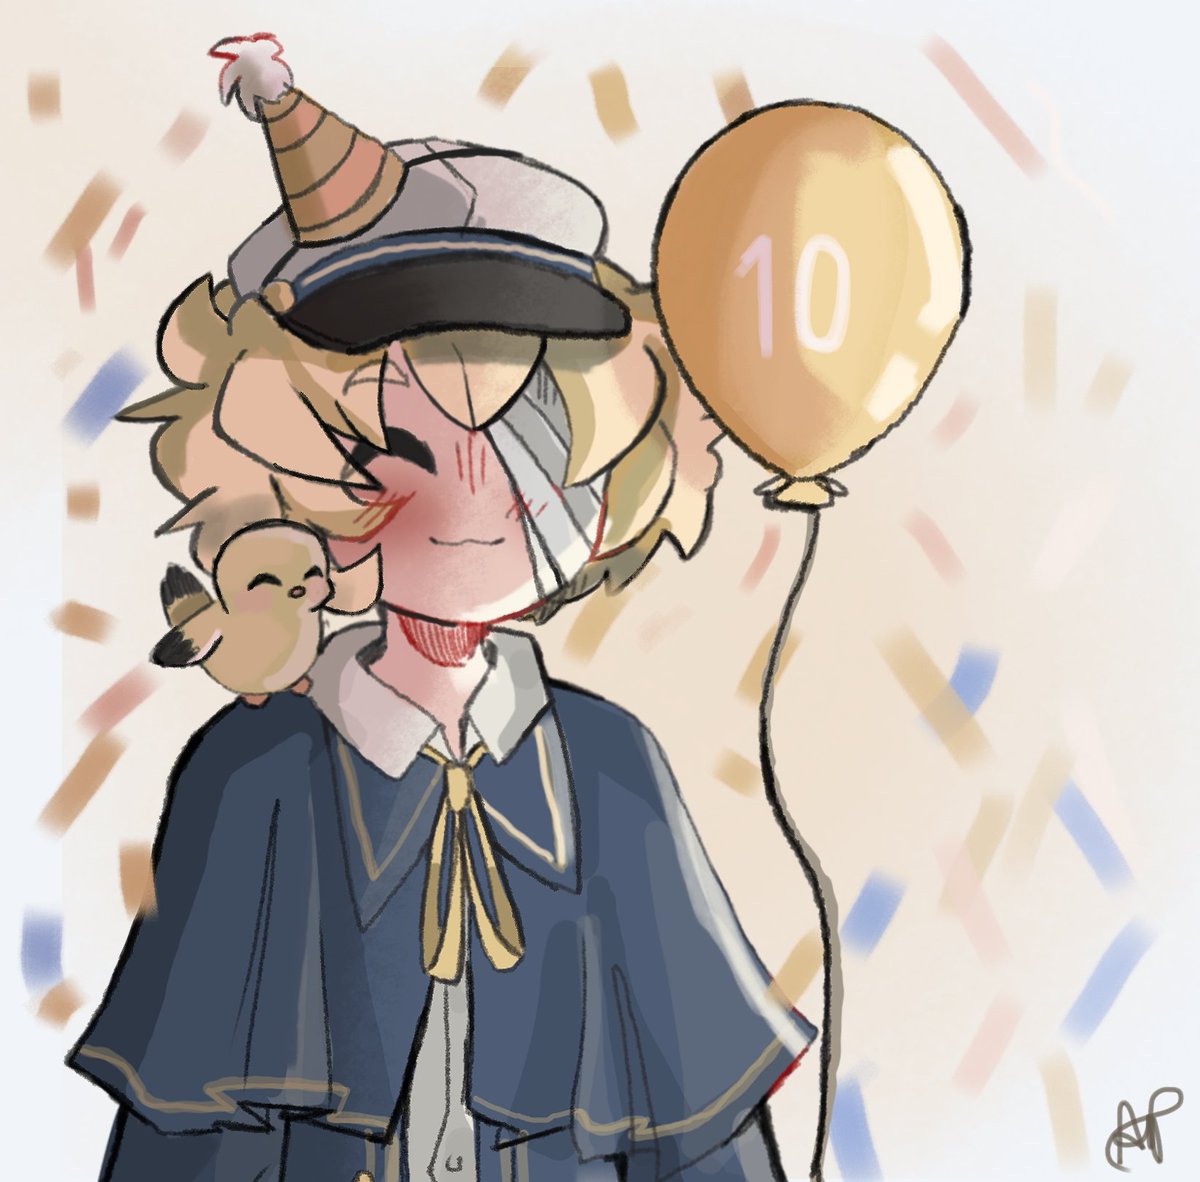 Hes a decade old :0 

#olivervocaloid #HappybirthdayOliver2021 #vocaloidoliver